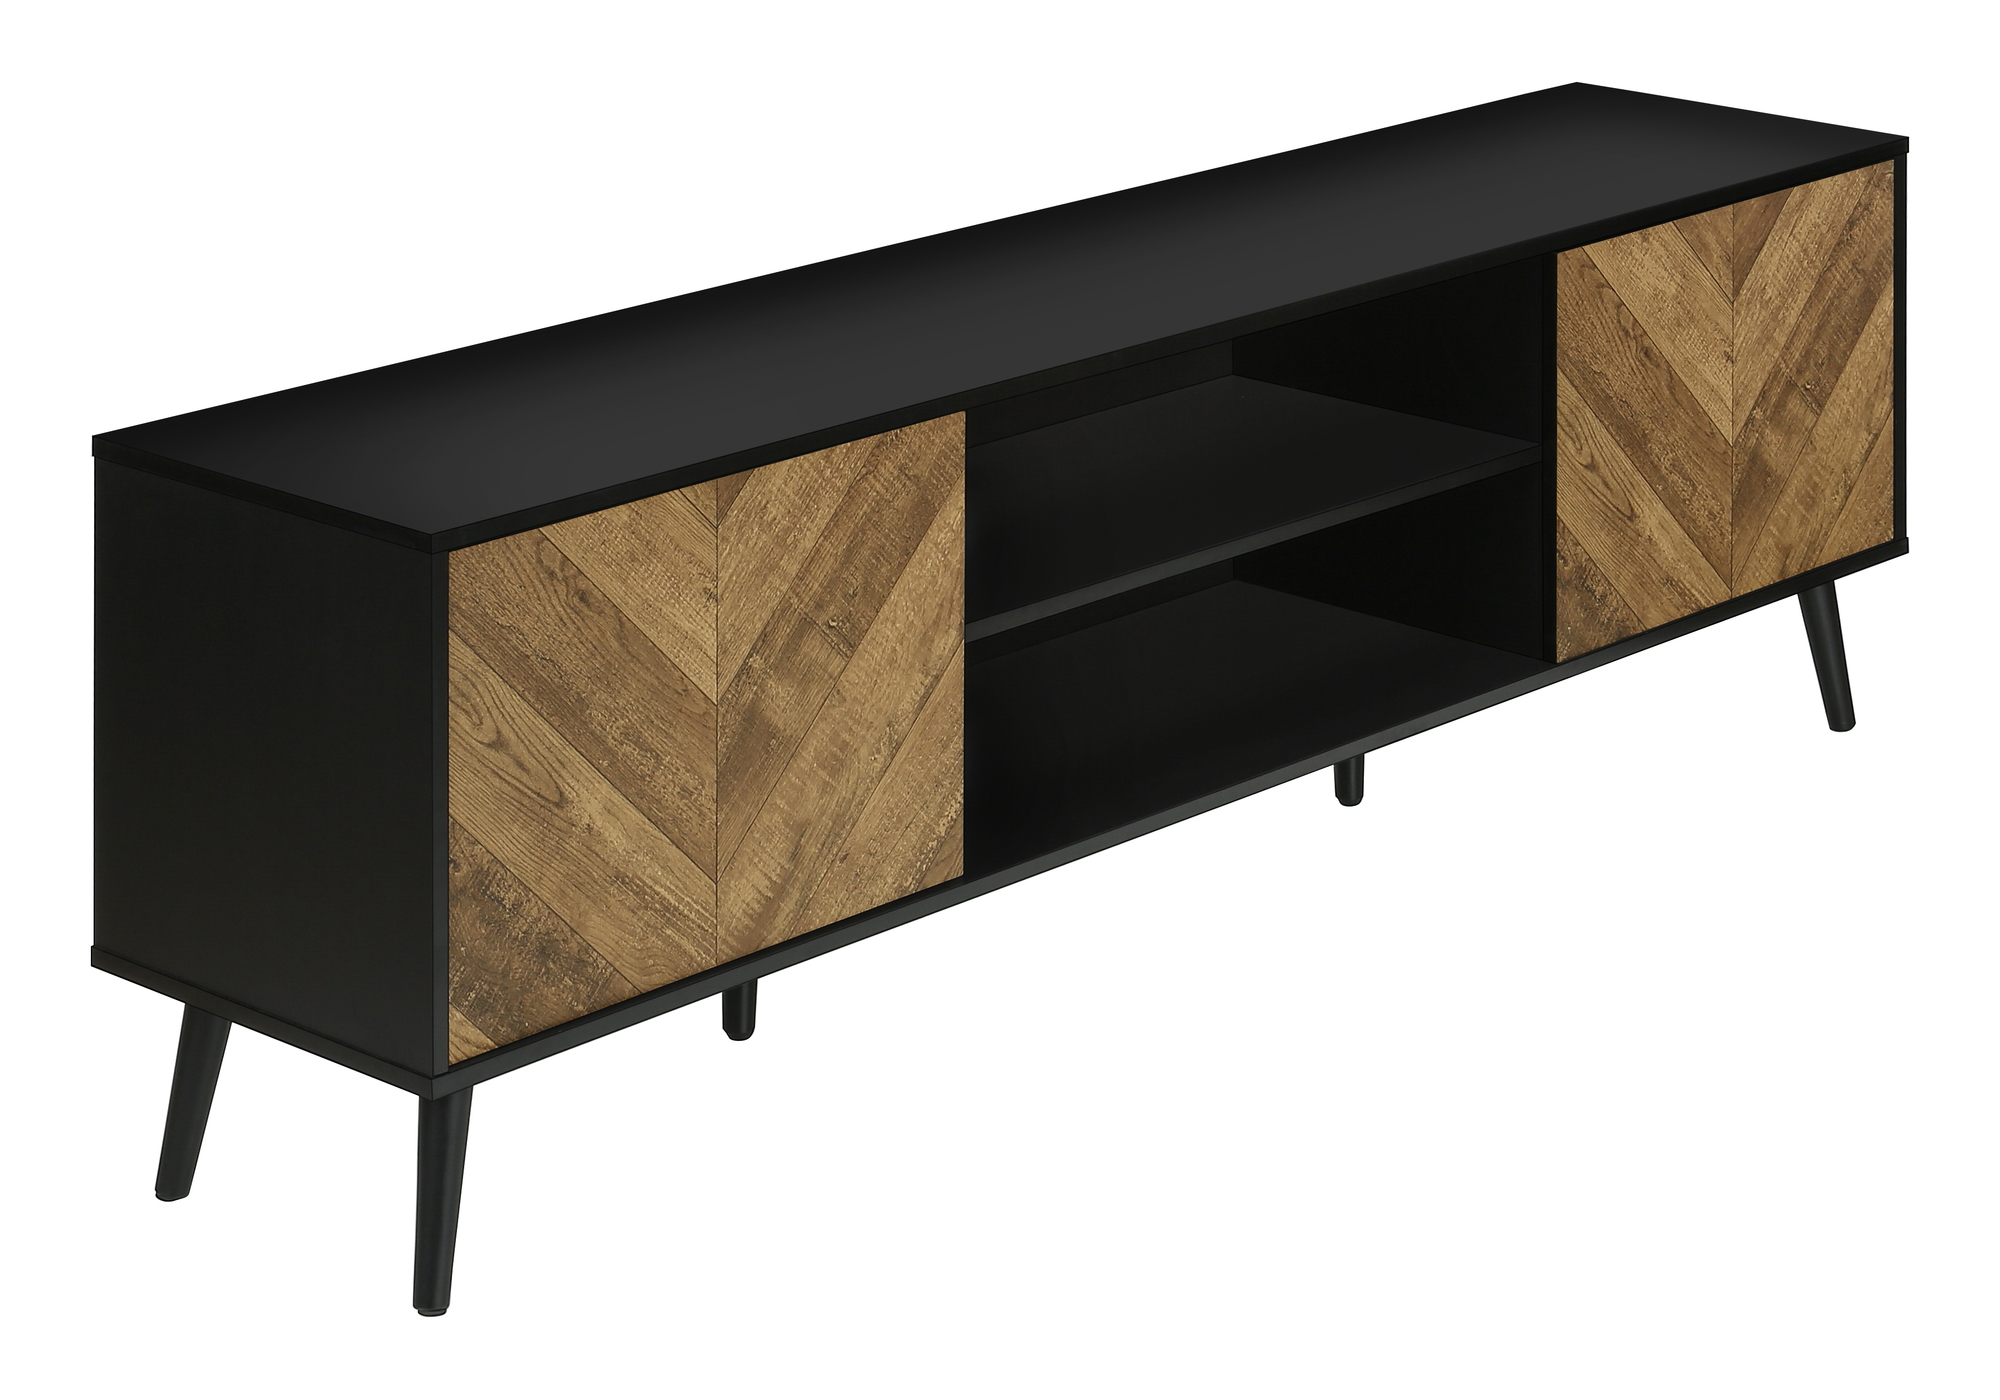 TV STAND - 72"L / BLACK WITH 2 WOOD-LOOK DOORS 